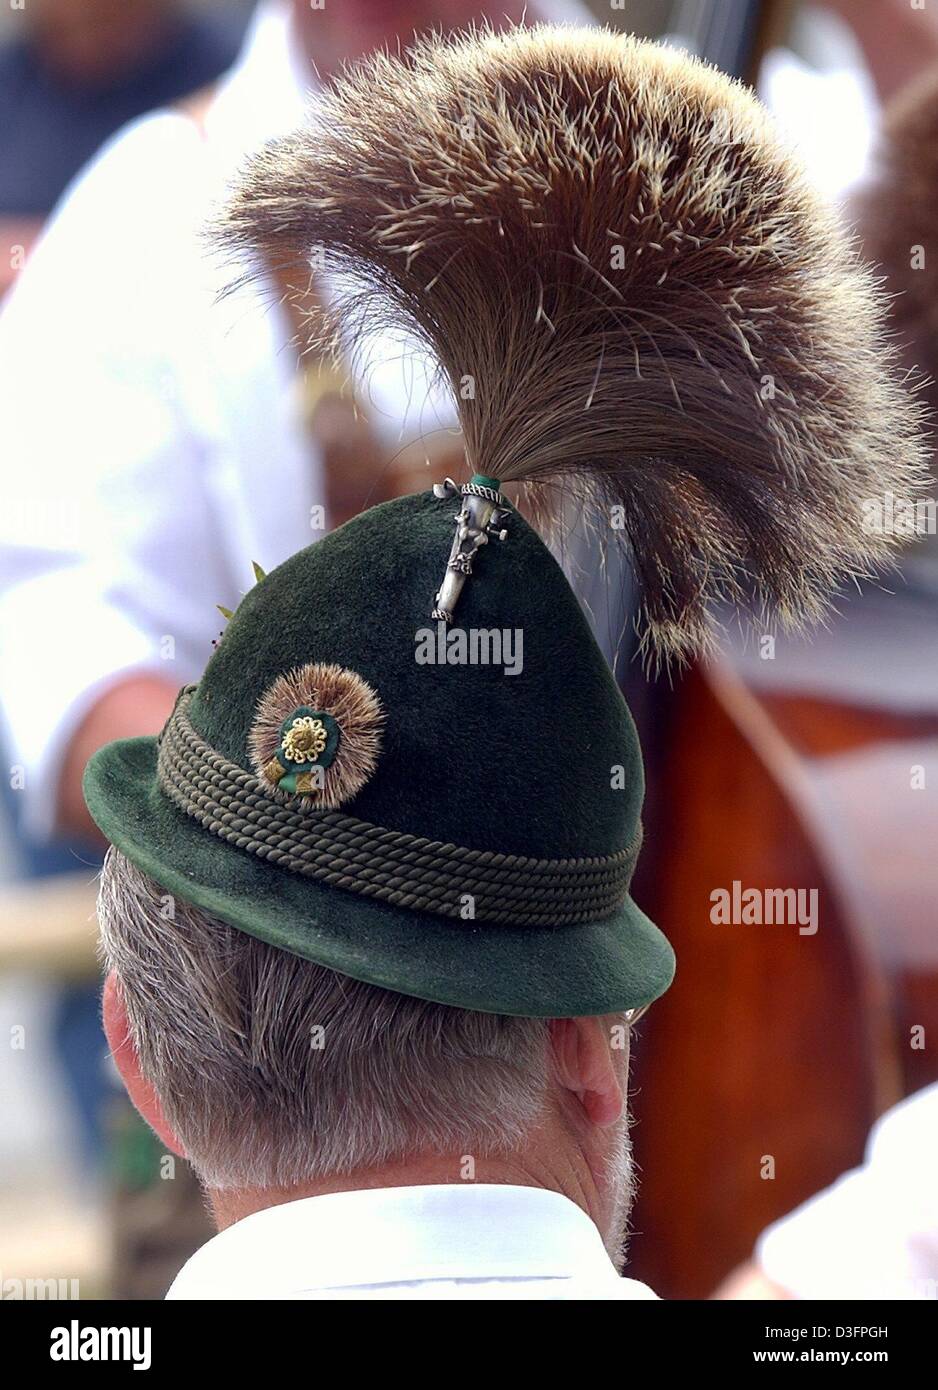 (dpa) - A Bavarian musician wears his tradition costume and hat in Berchtesgarden, Germany, 9 May 2003. Stock Photo